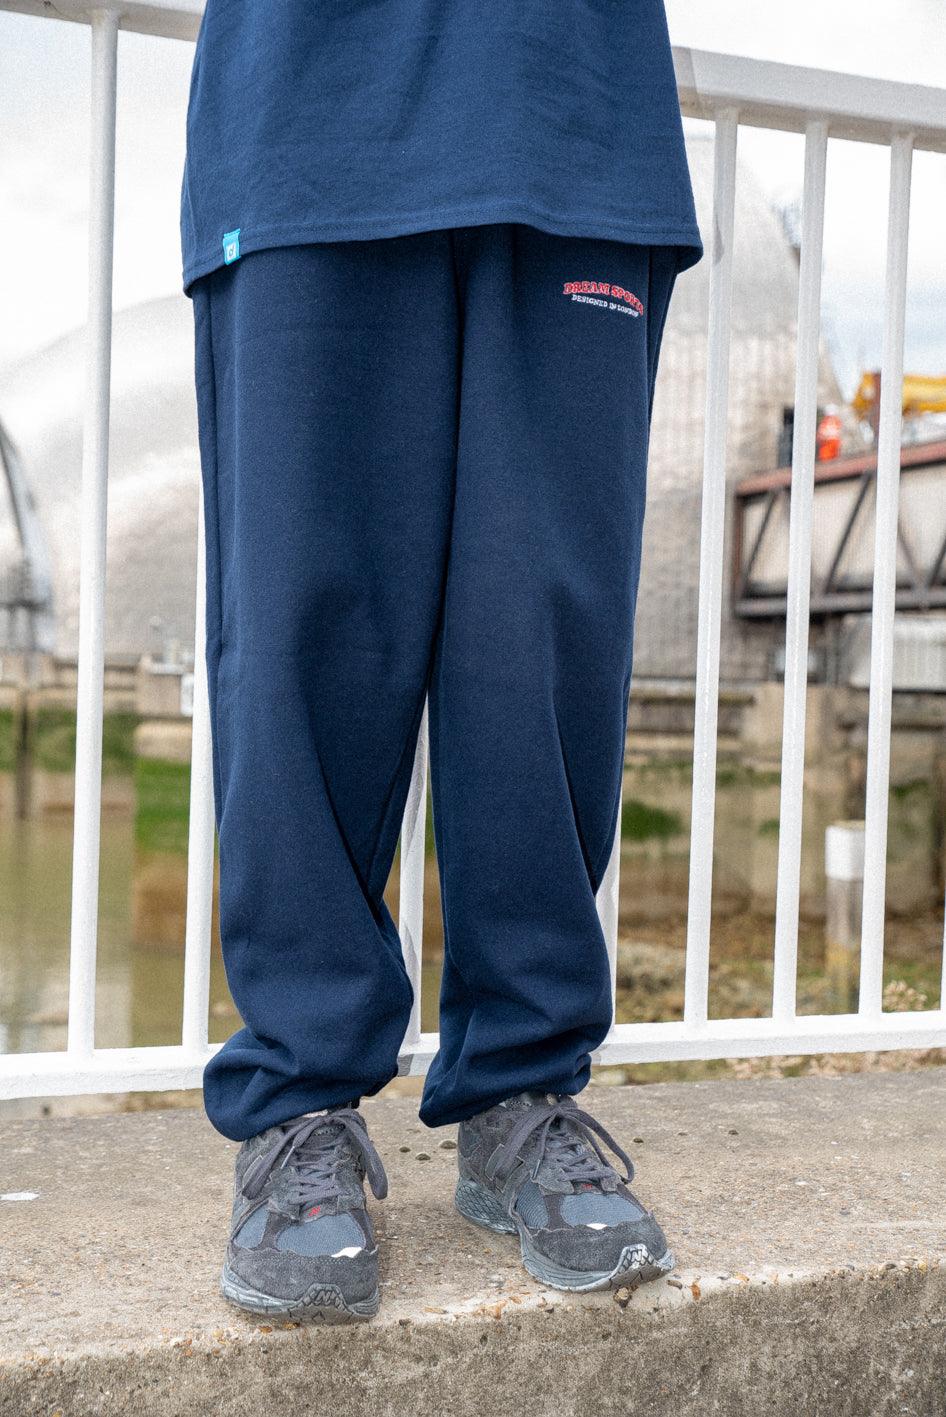 Joggers in Navy with Dream Sports Embroidery - Dreambutdonotsleep